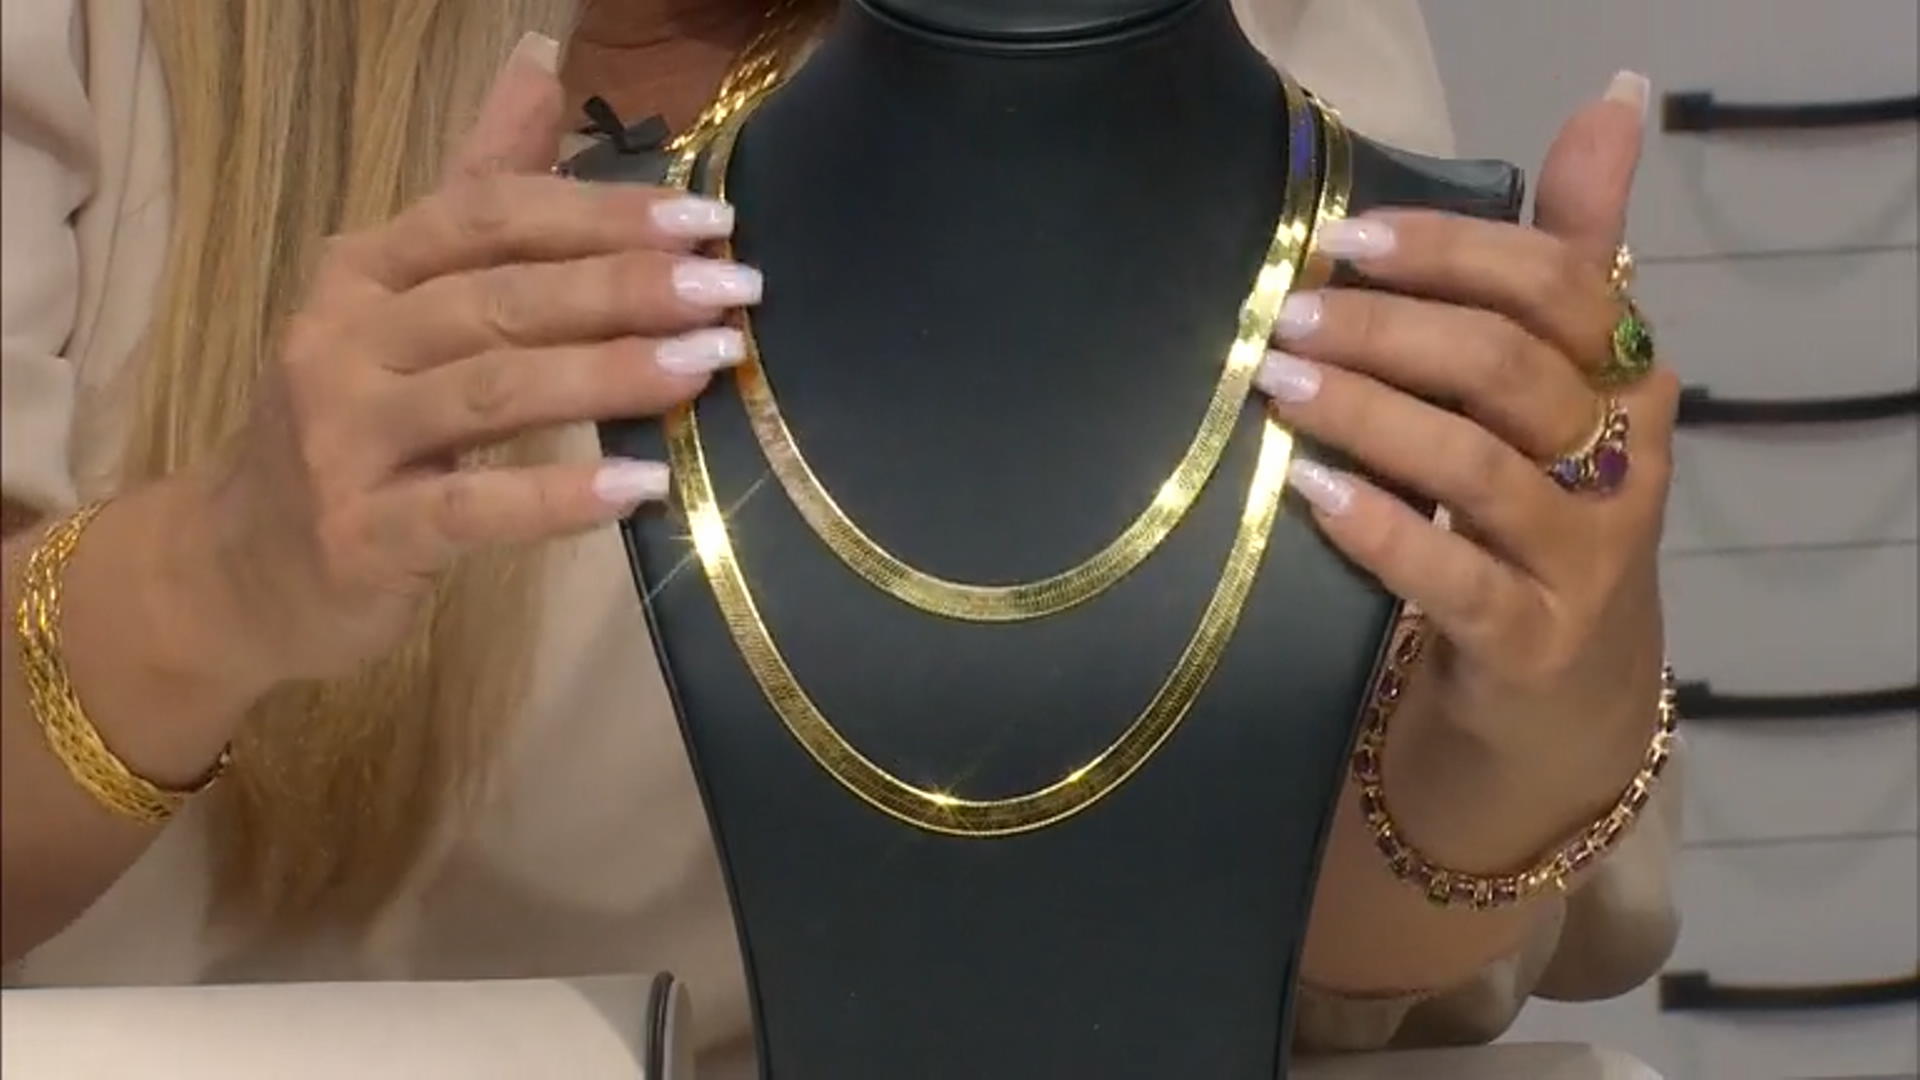 18K Yellow Gold Over Sterling Silver Reversible Diamond Cut Herringbone Chain Link Necklace Video Thumbnail